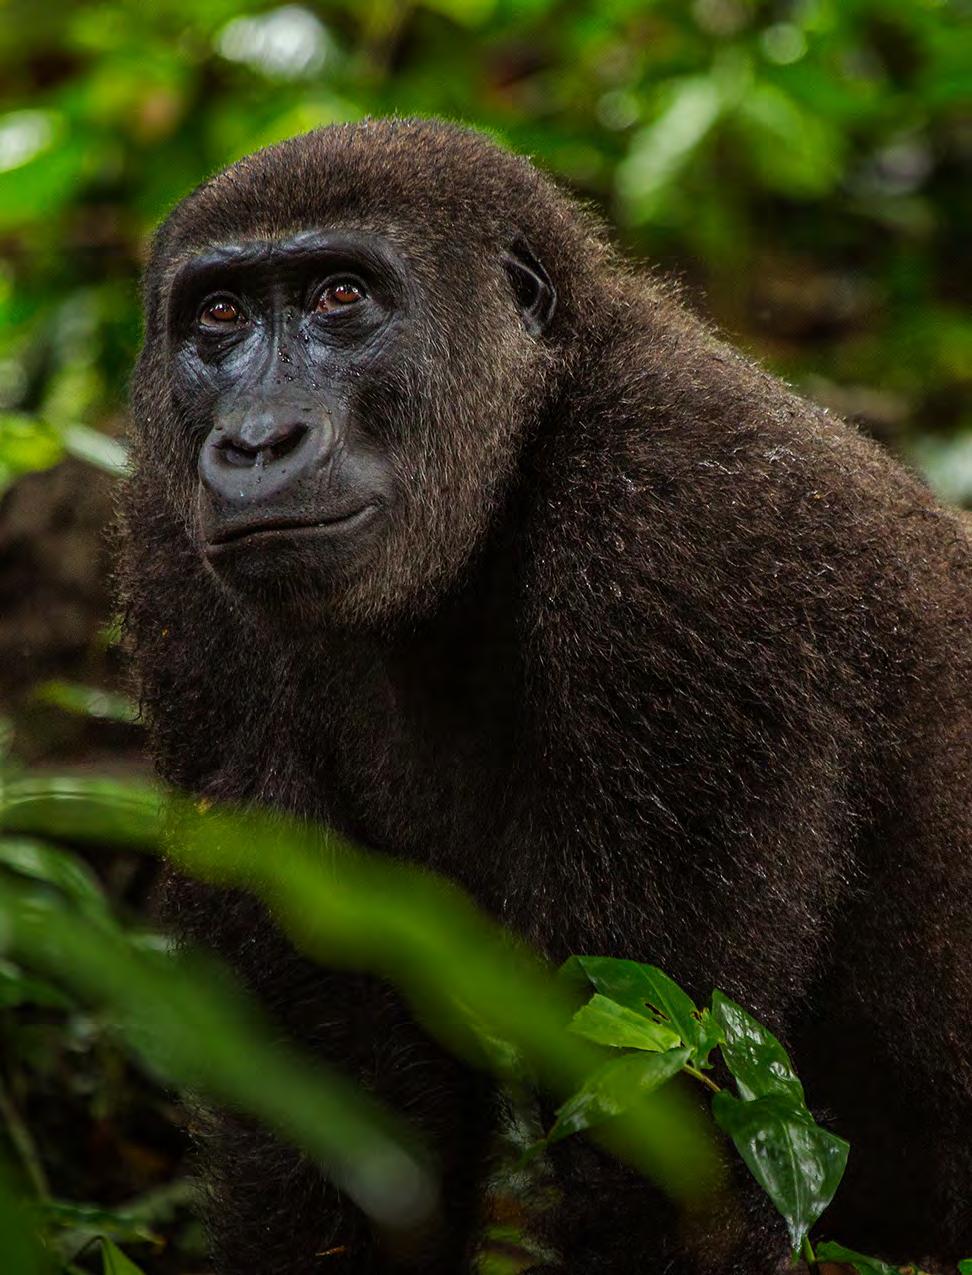 info@deeperafrica.com www.deeperafrica.com Lowland Gorillas DAY-BY-DAY ITINERARY Primate viewing safari At first, all you see is the deep green leaves towering over your head.